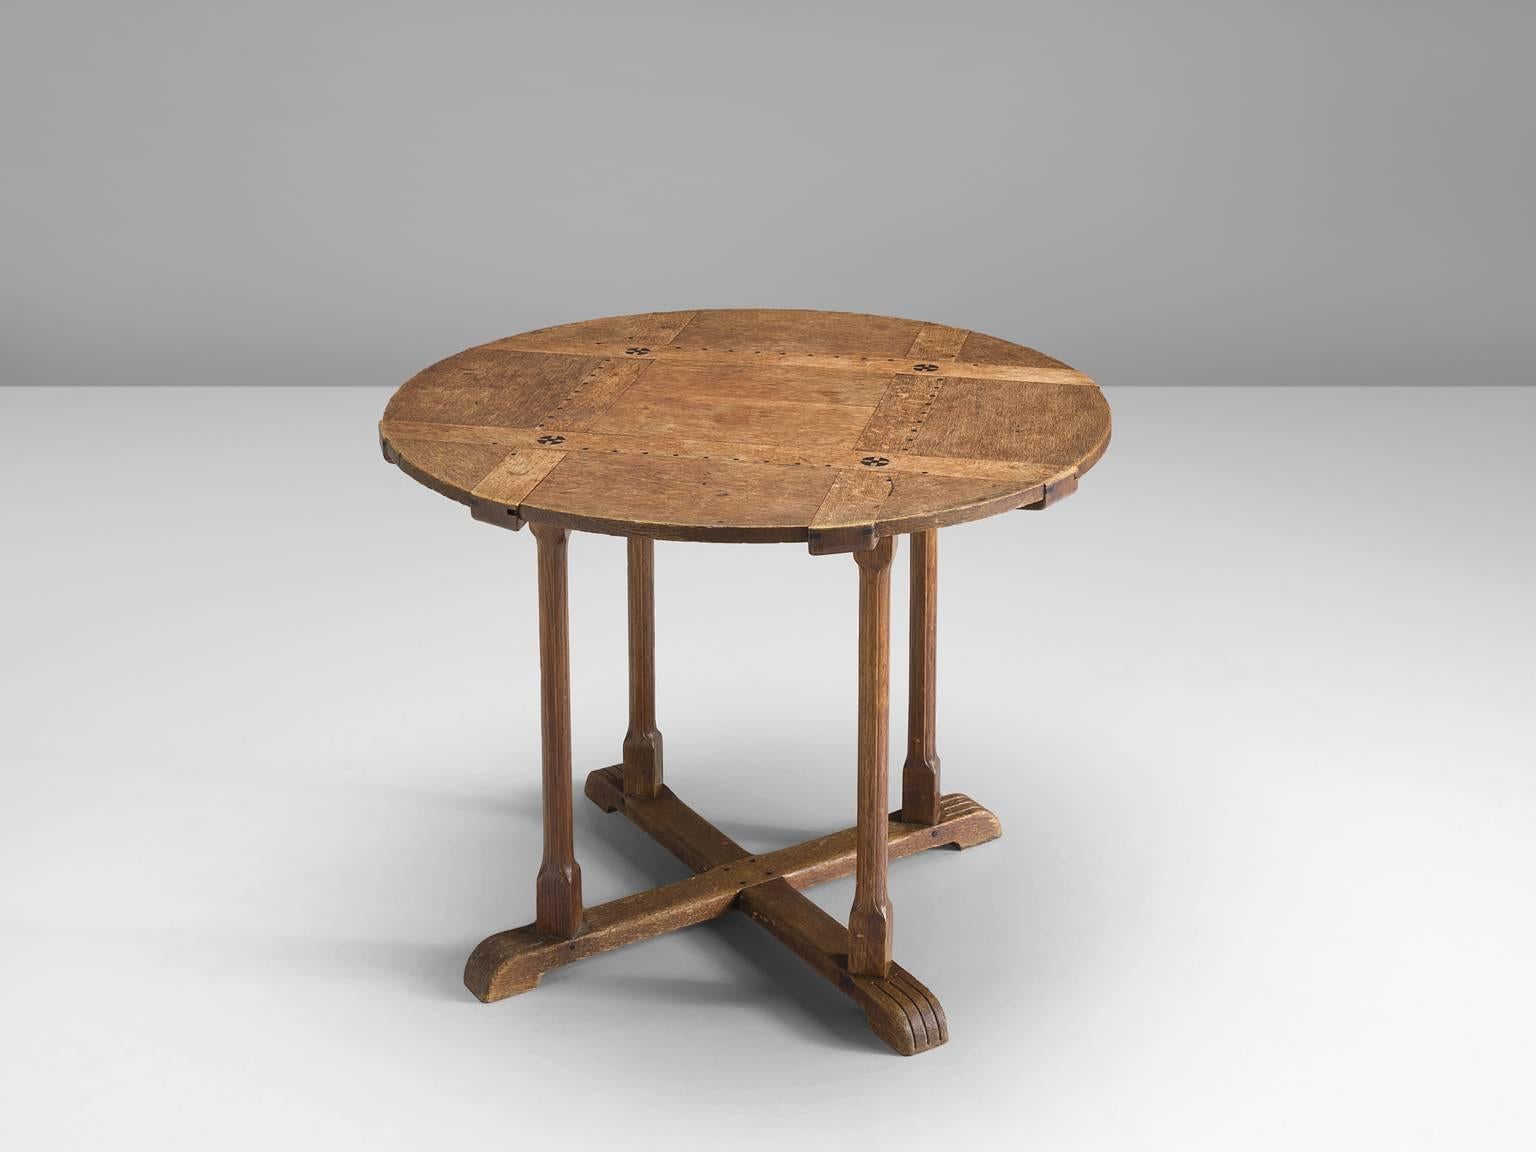 Jac van den Bosch for 't Binnenhuis, oak, side table, the Netherlands, 1910

This early Dutch side table is executed in oak and is designed and holds a monogram by Jac. van den Bosch. The table has a crossed foot and four carved legs. The tabletop